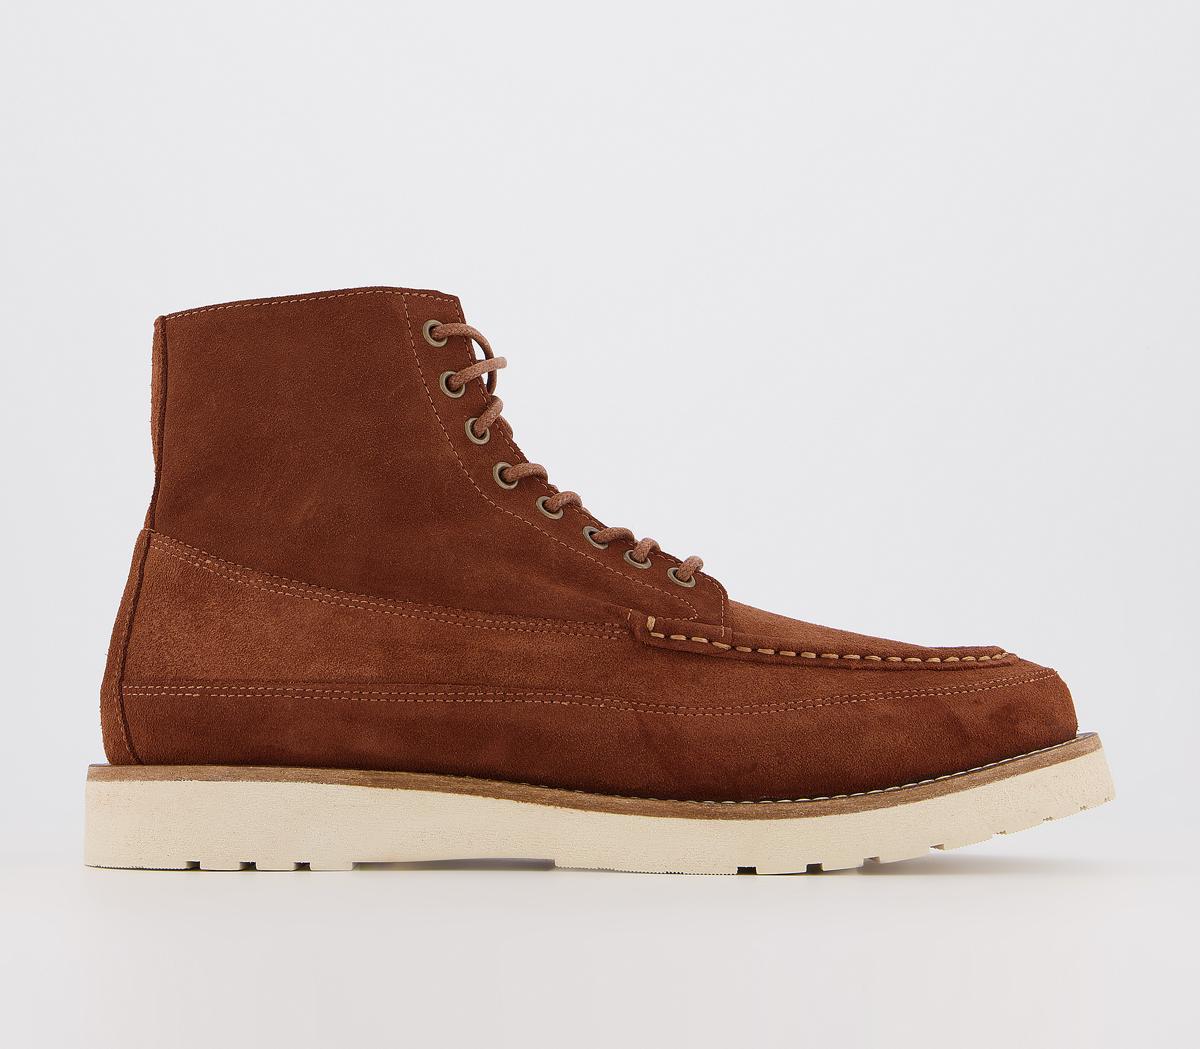 OFFICEBulb Lace BootsRust Suede